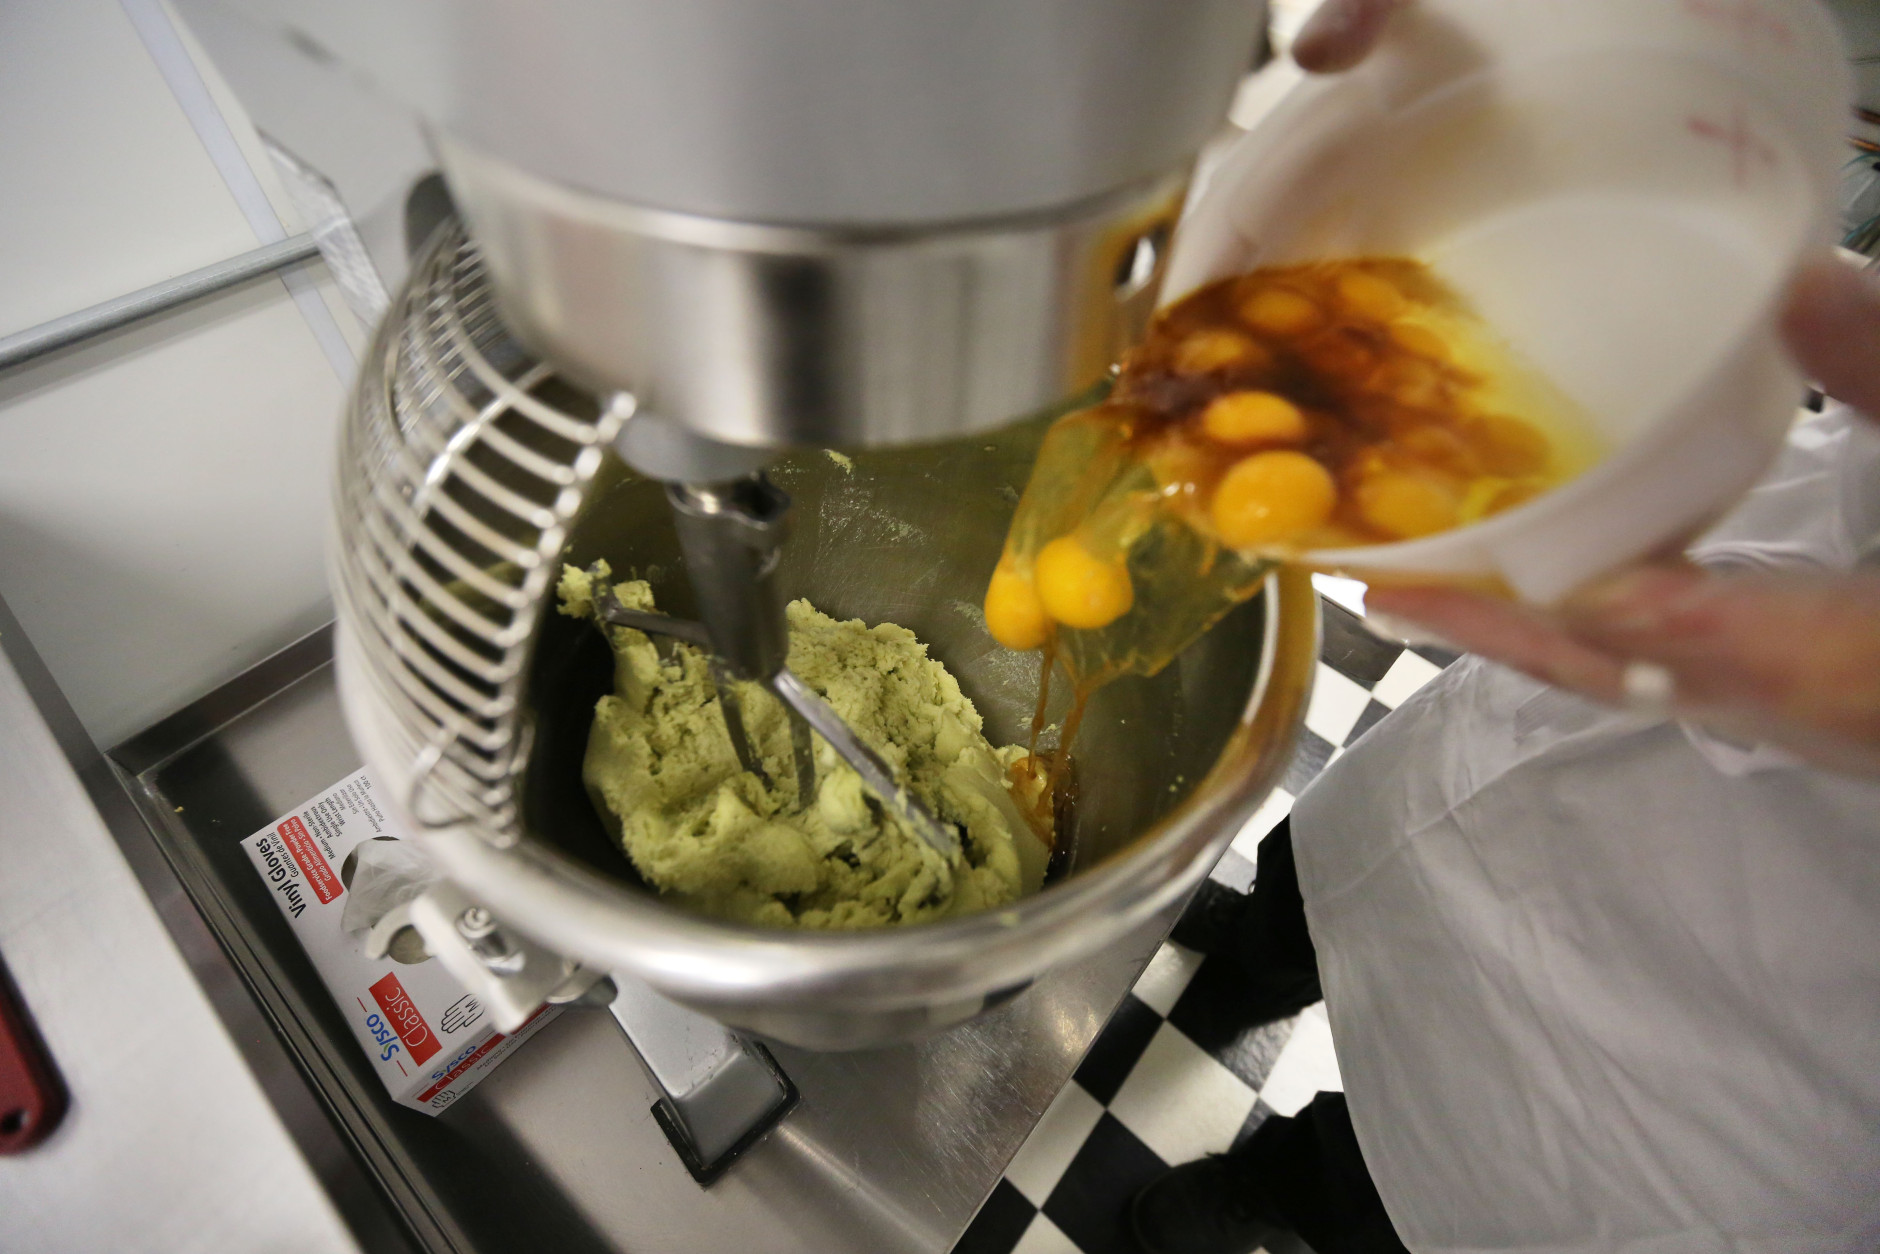 In this June 19, 2014 photo, eggs are added into a mixer with green cannabis-infused "canna butter" in a stainless steel bowl at the start of batter mixing for peanut butter jelly cups, inside Sweet Grass Kitchen, a well-established gourmet marijuana edibles bakery which sells its confections to retail outlets, in Denver. Sweet Grass Kitchen, like other cannabis food producers in the state, is held to rigorous health inspection standards, and has received praise from inspectors, according to owner Julie Berliner. (AP Photo/Brennan Linsley)